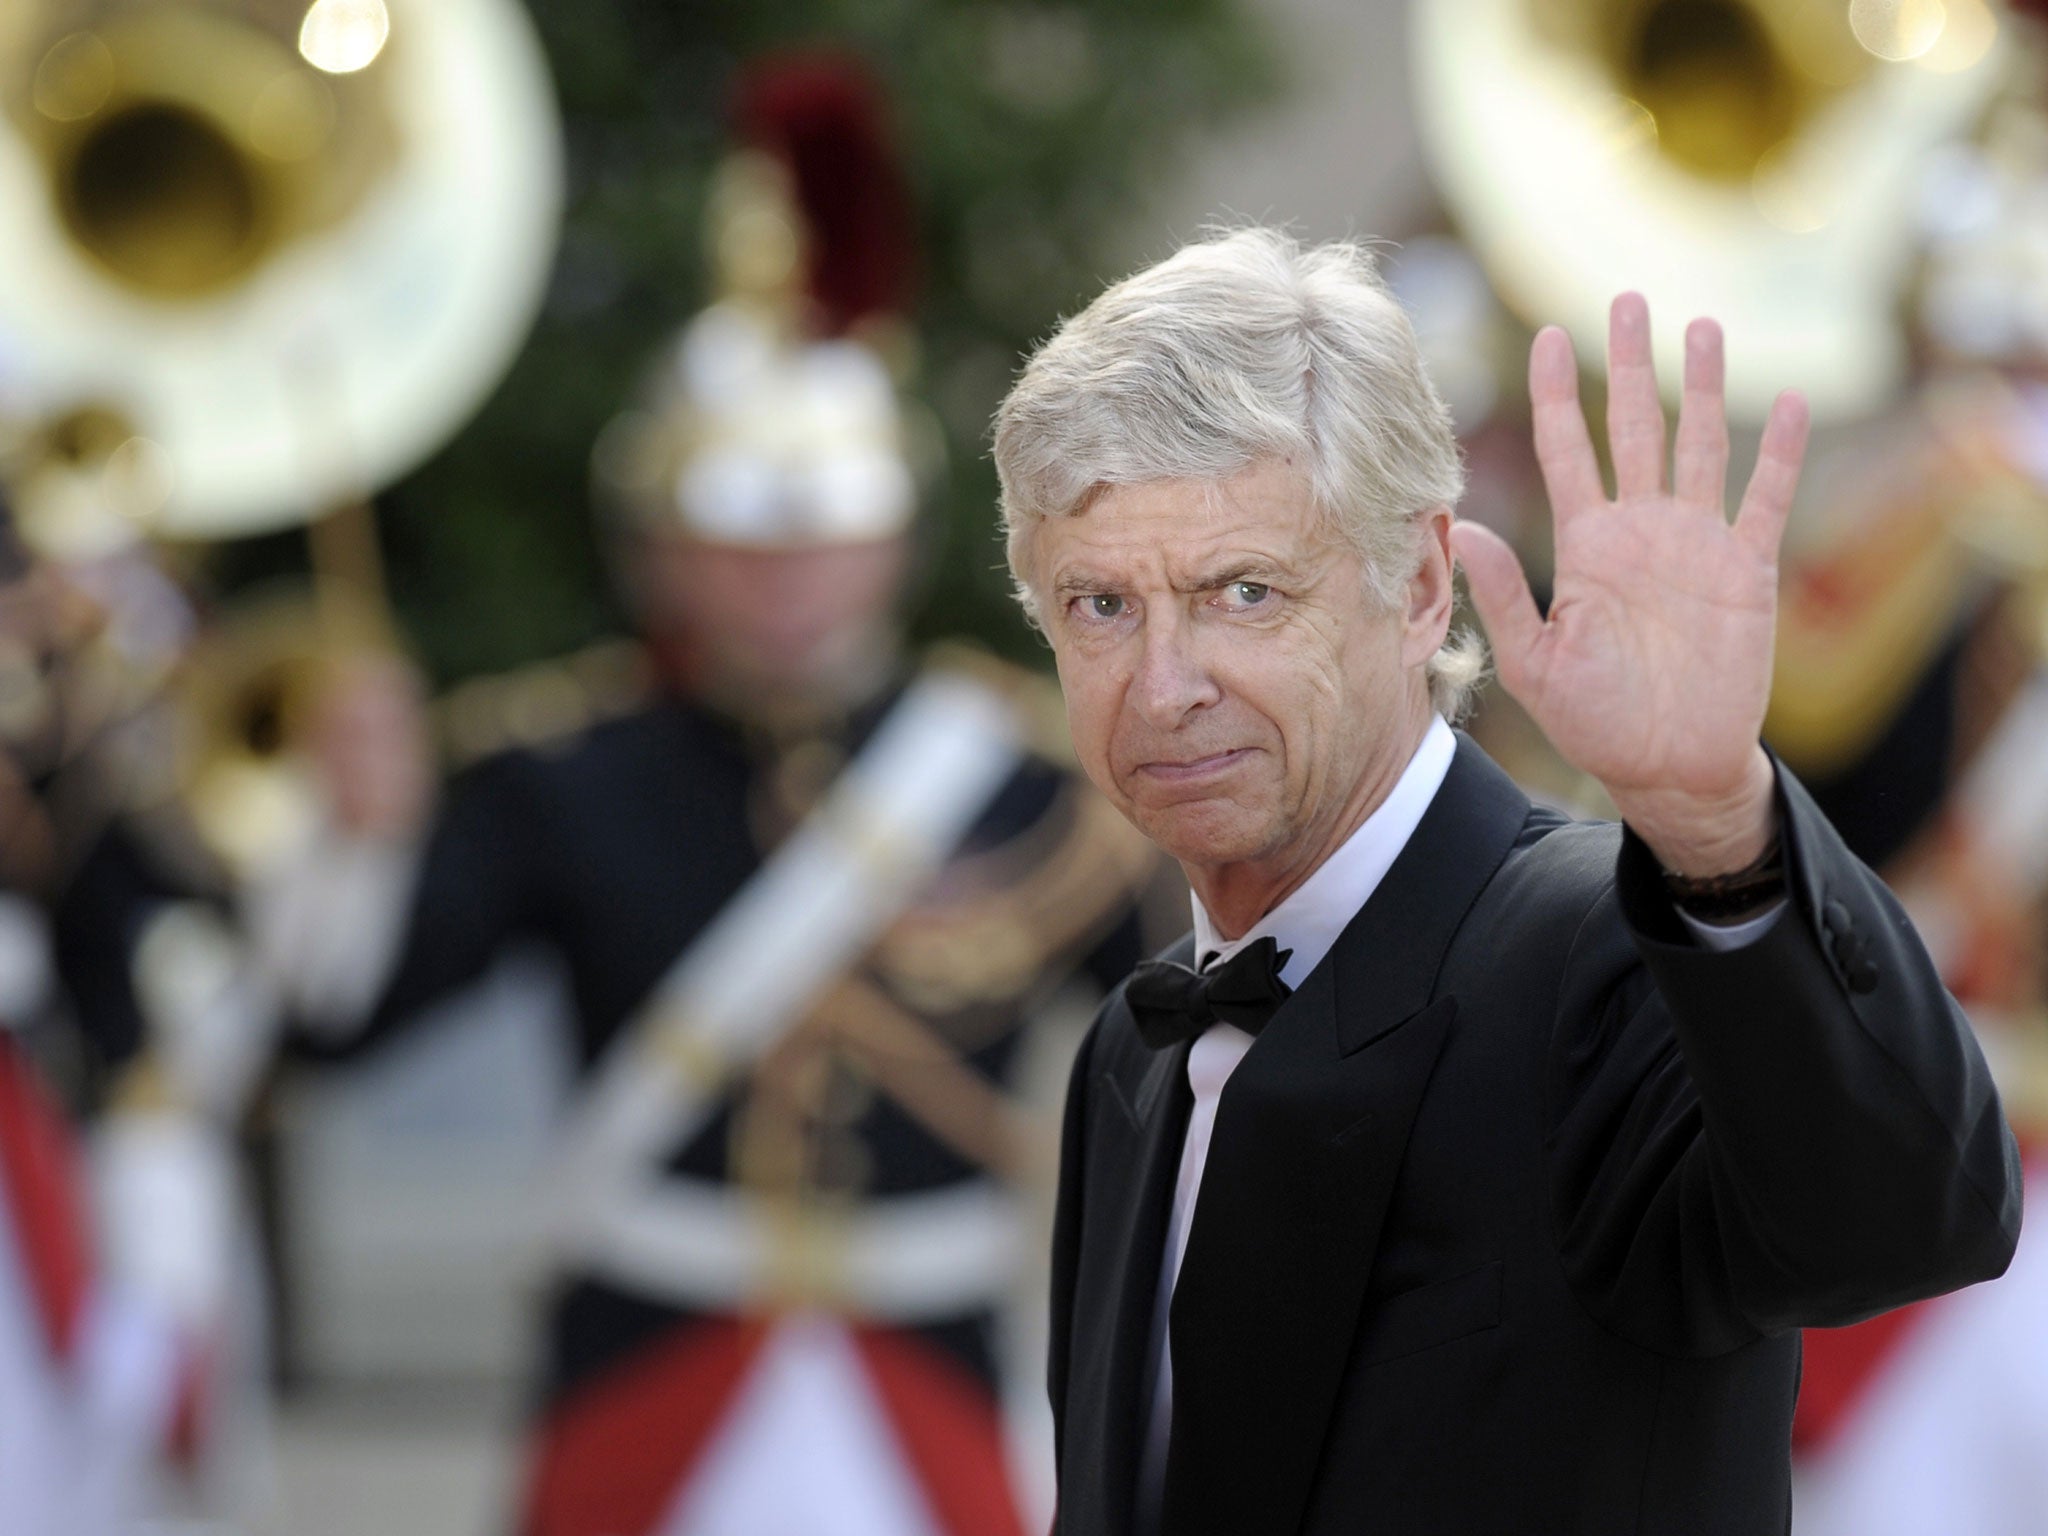 Arsenal's French coach Arsene Wenger waves as he arrive for a state dinner at the Elysee presidential palace in Paris